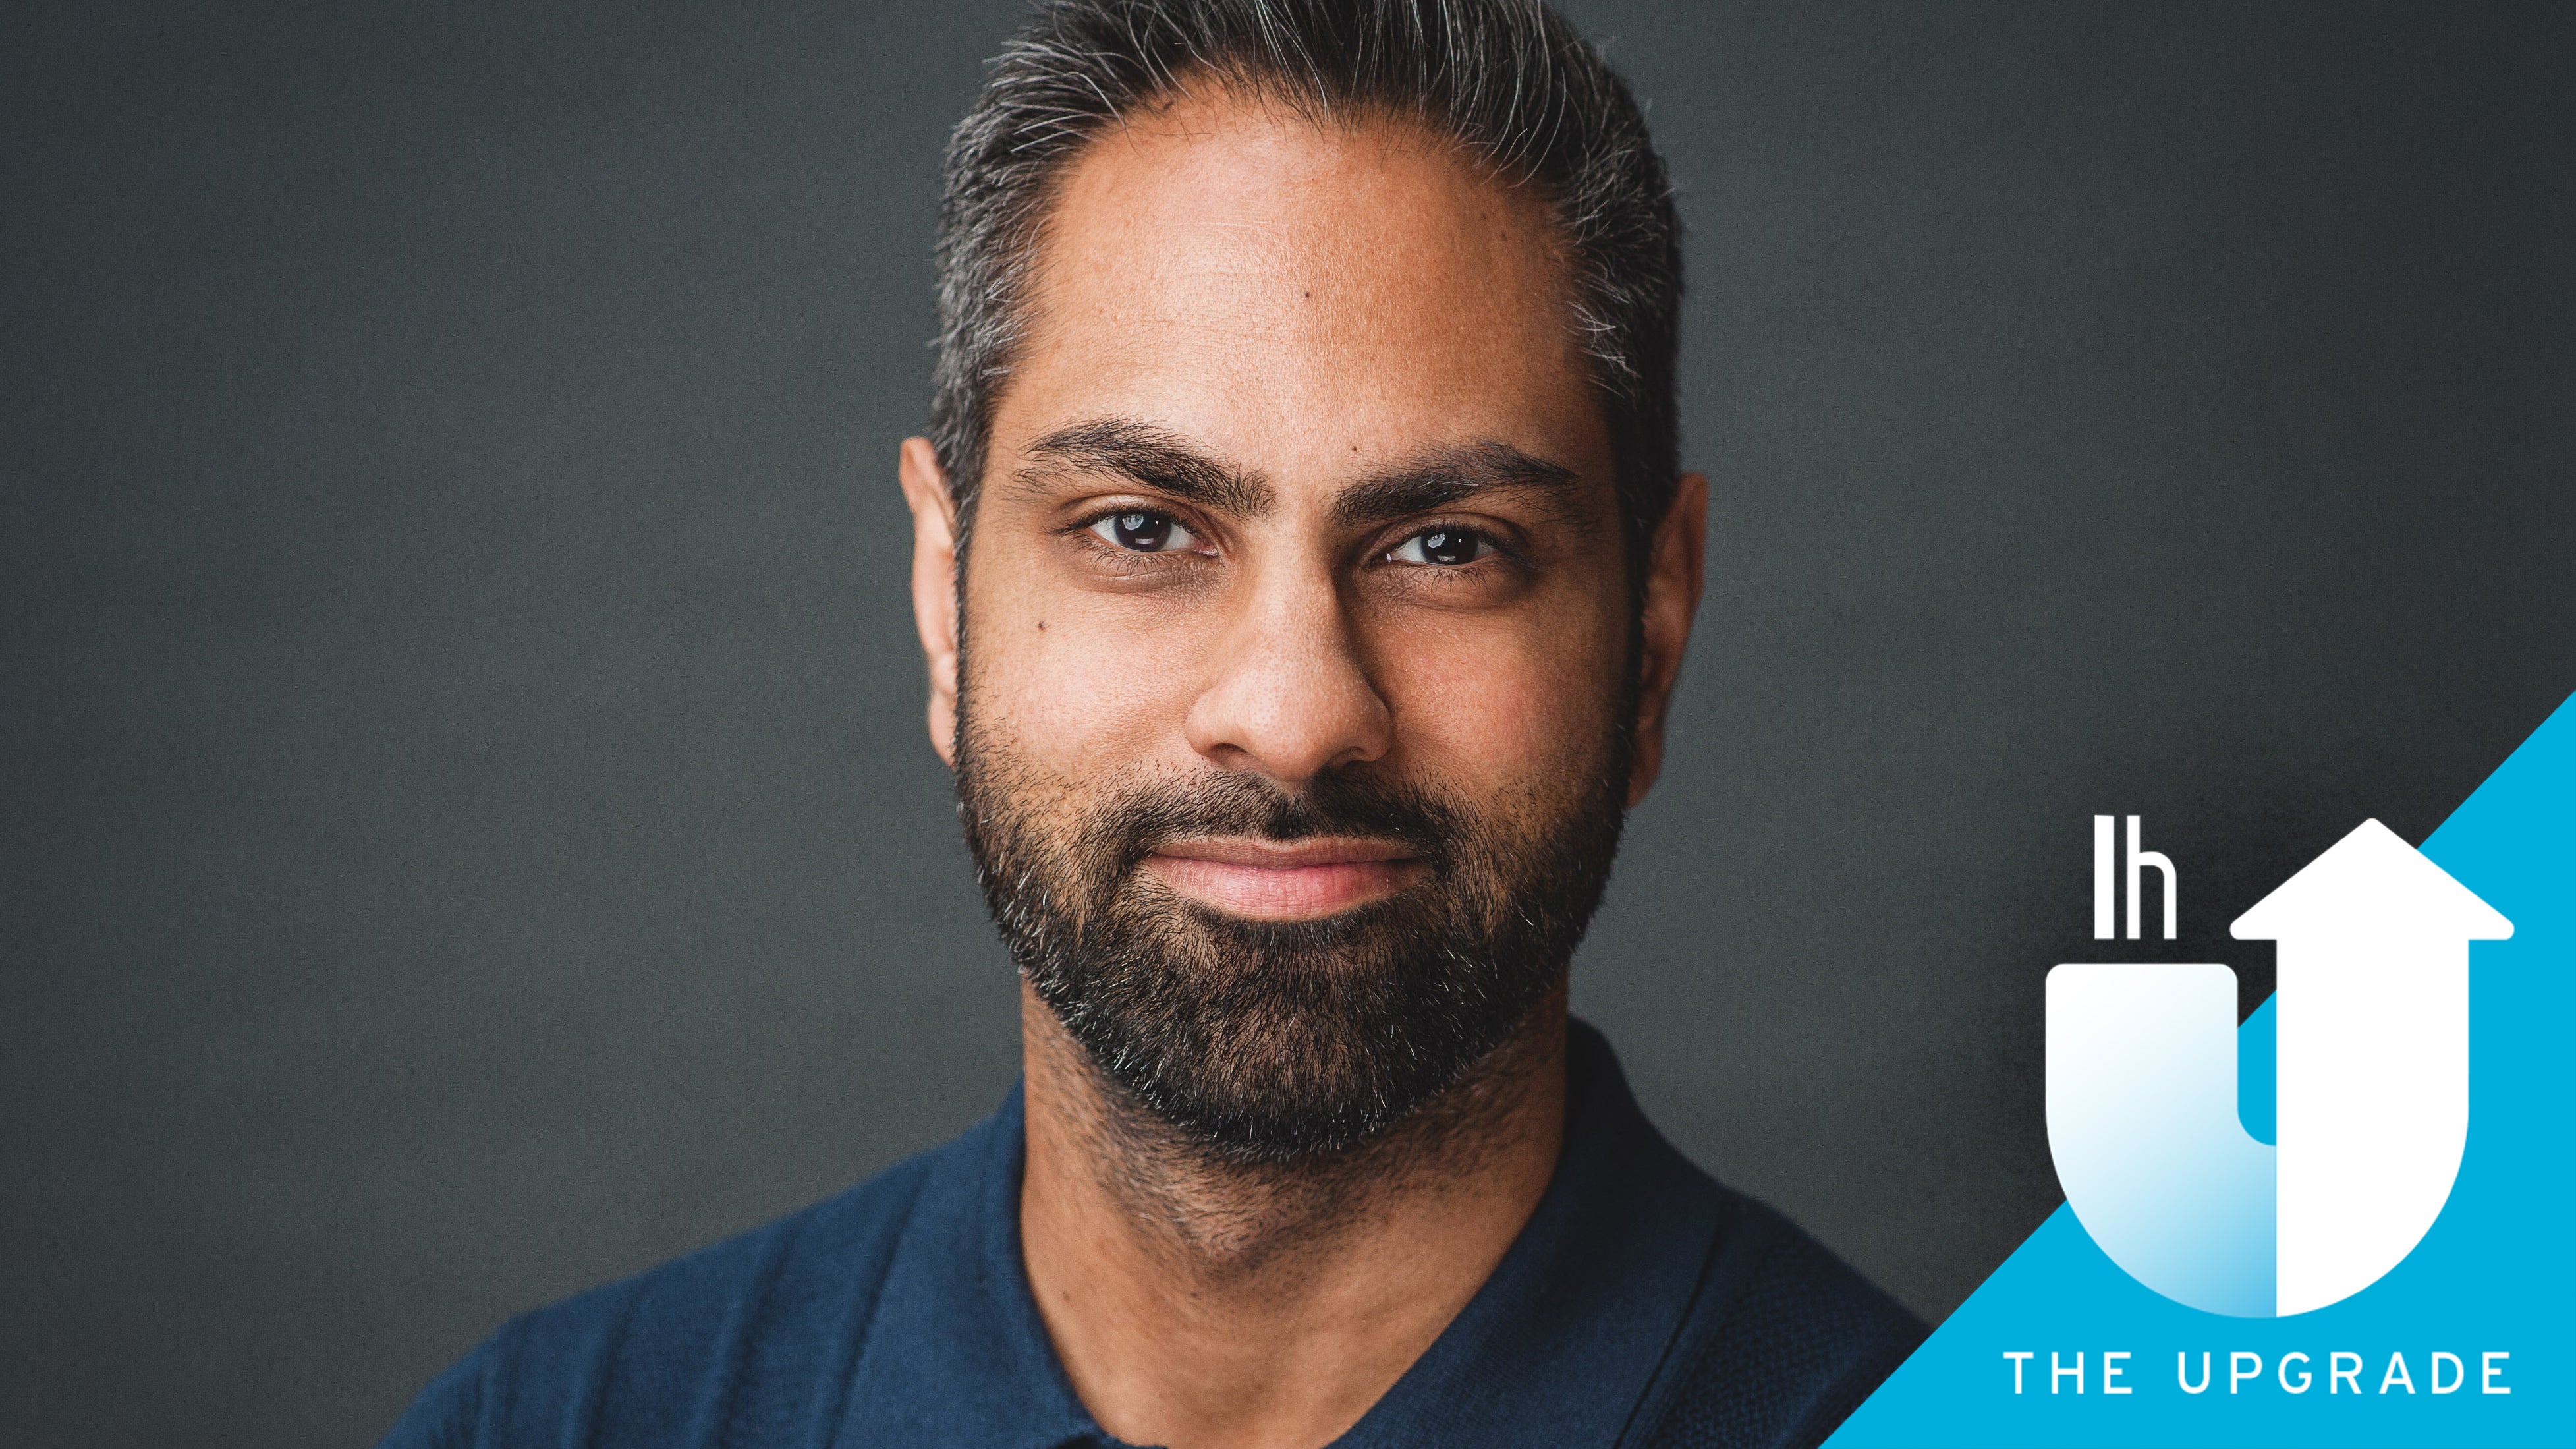 How To Get Rich, With Personal Finance Expert Ramit Sethi